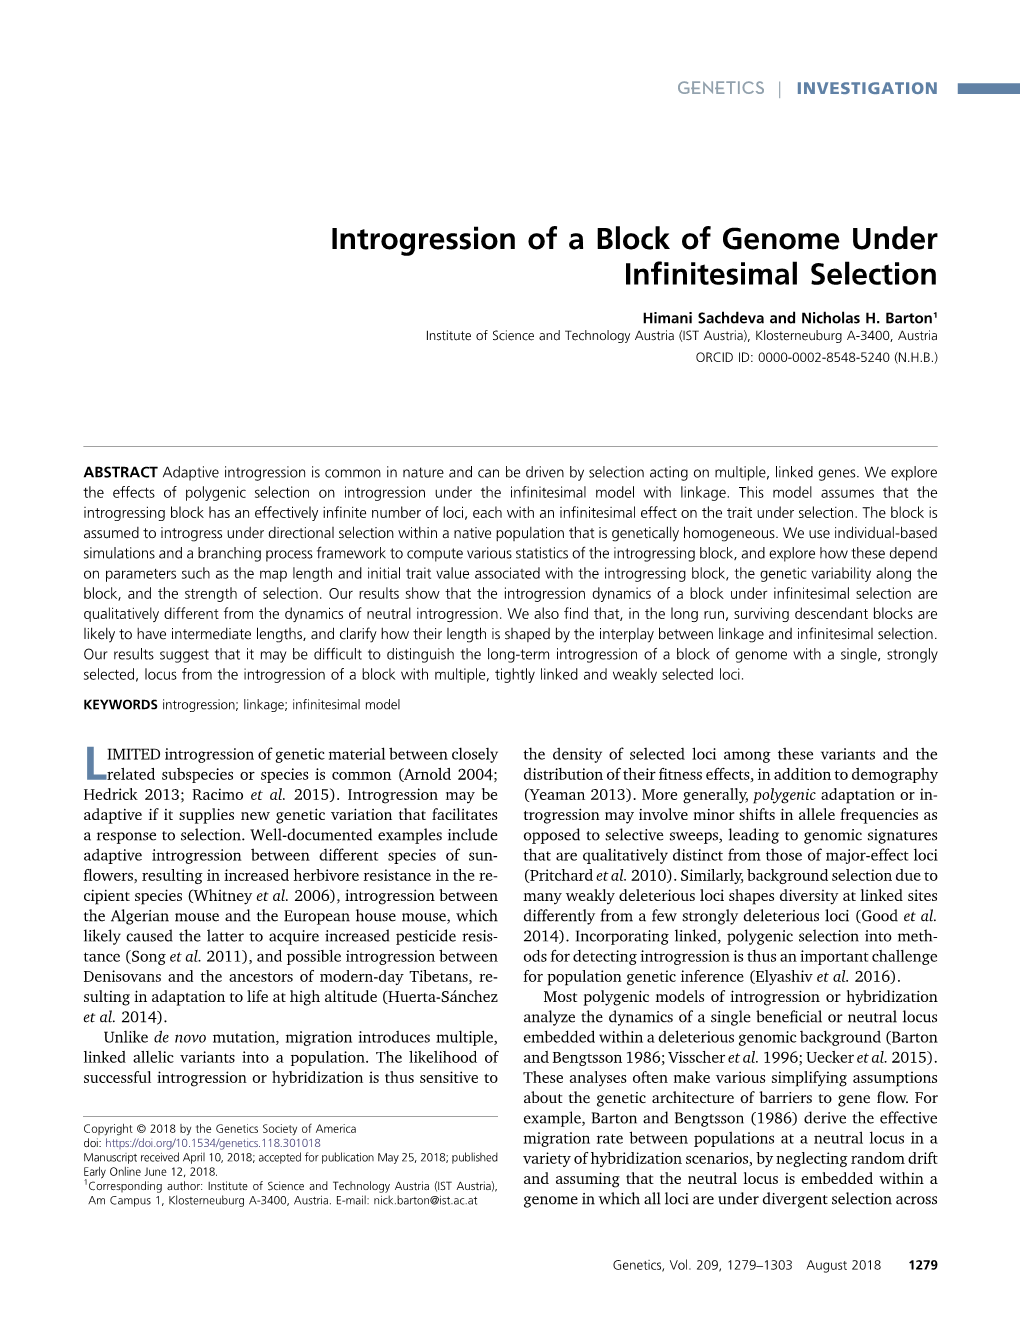 Introgression of a Block of Genome Under Infinitesimal Selection